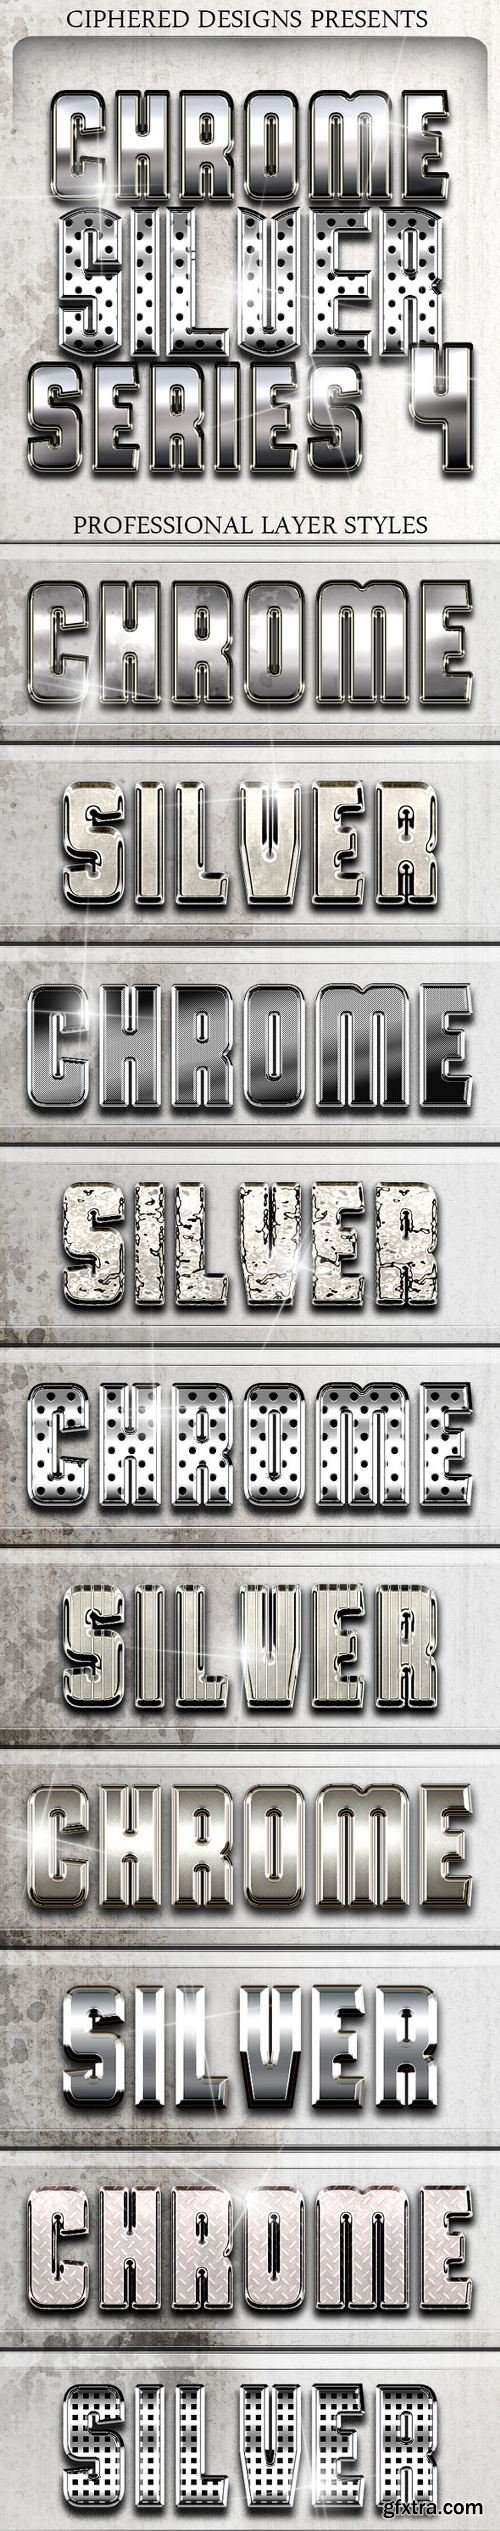 Graphicriver - Chrome & Silver Series 4 - Pro Text Effects 8488899